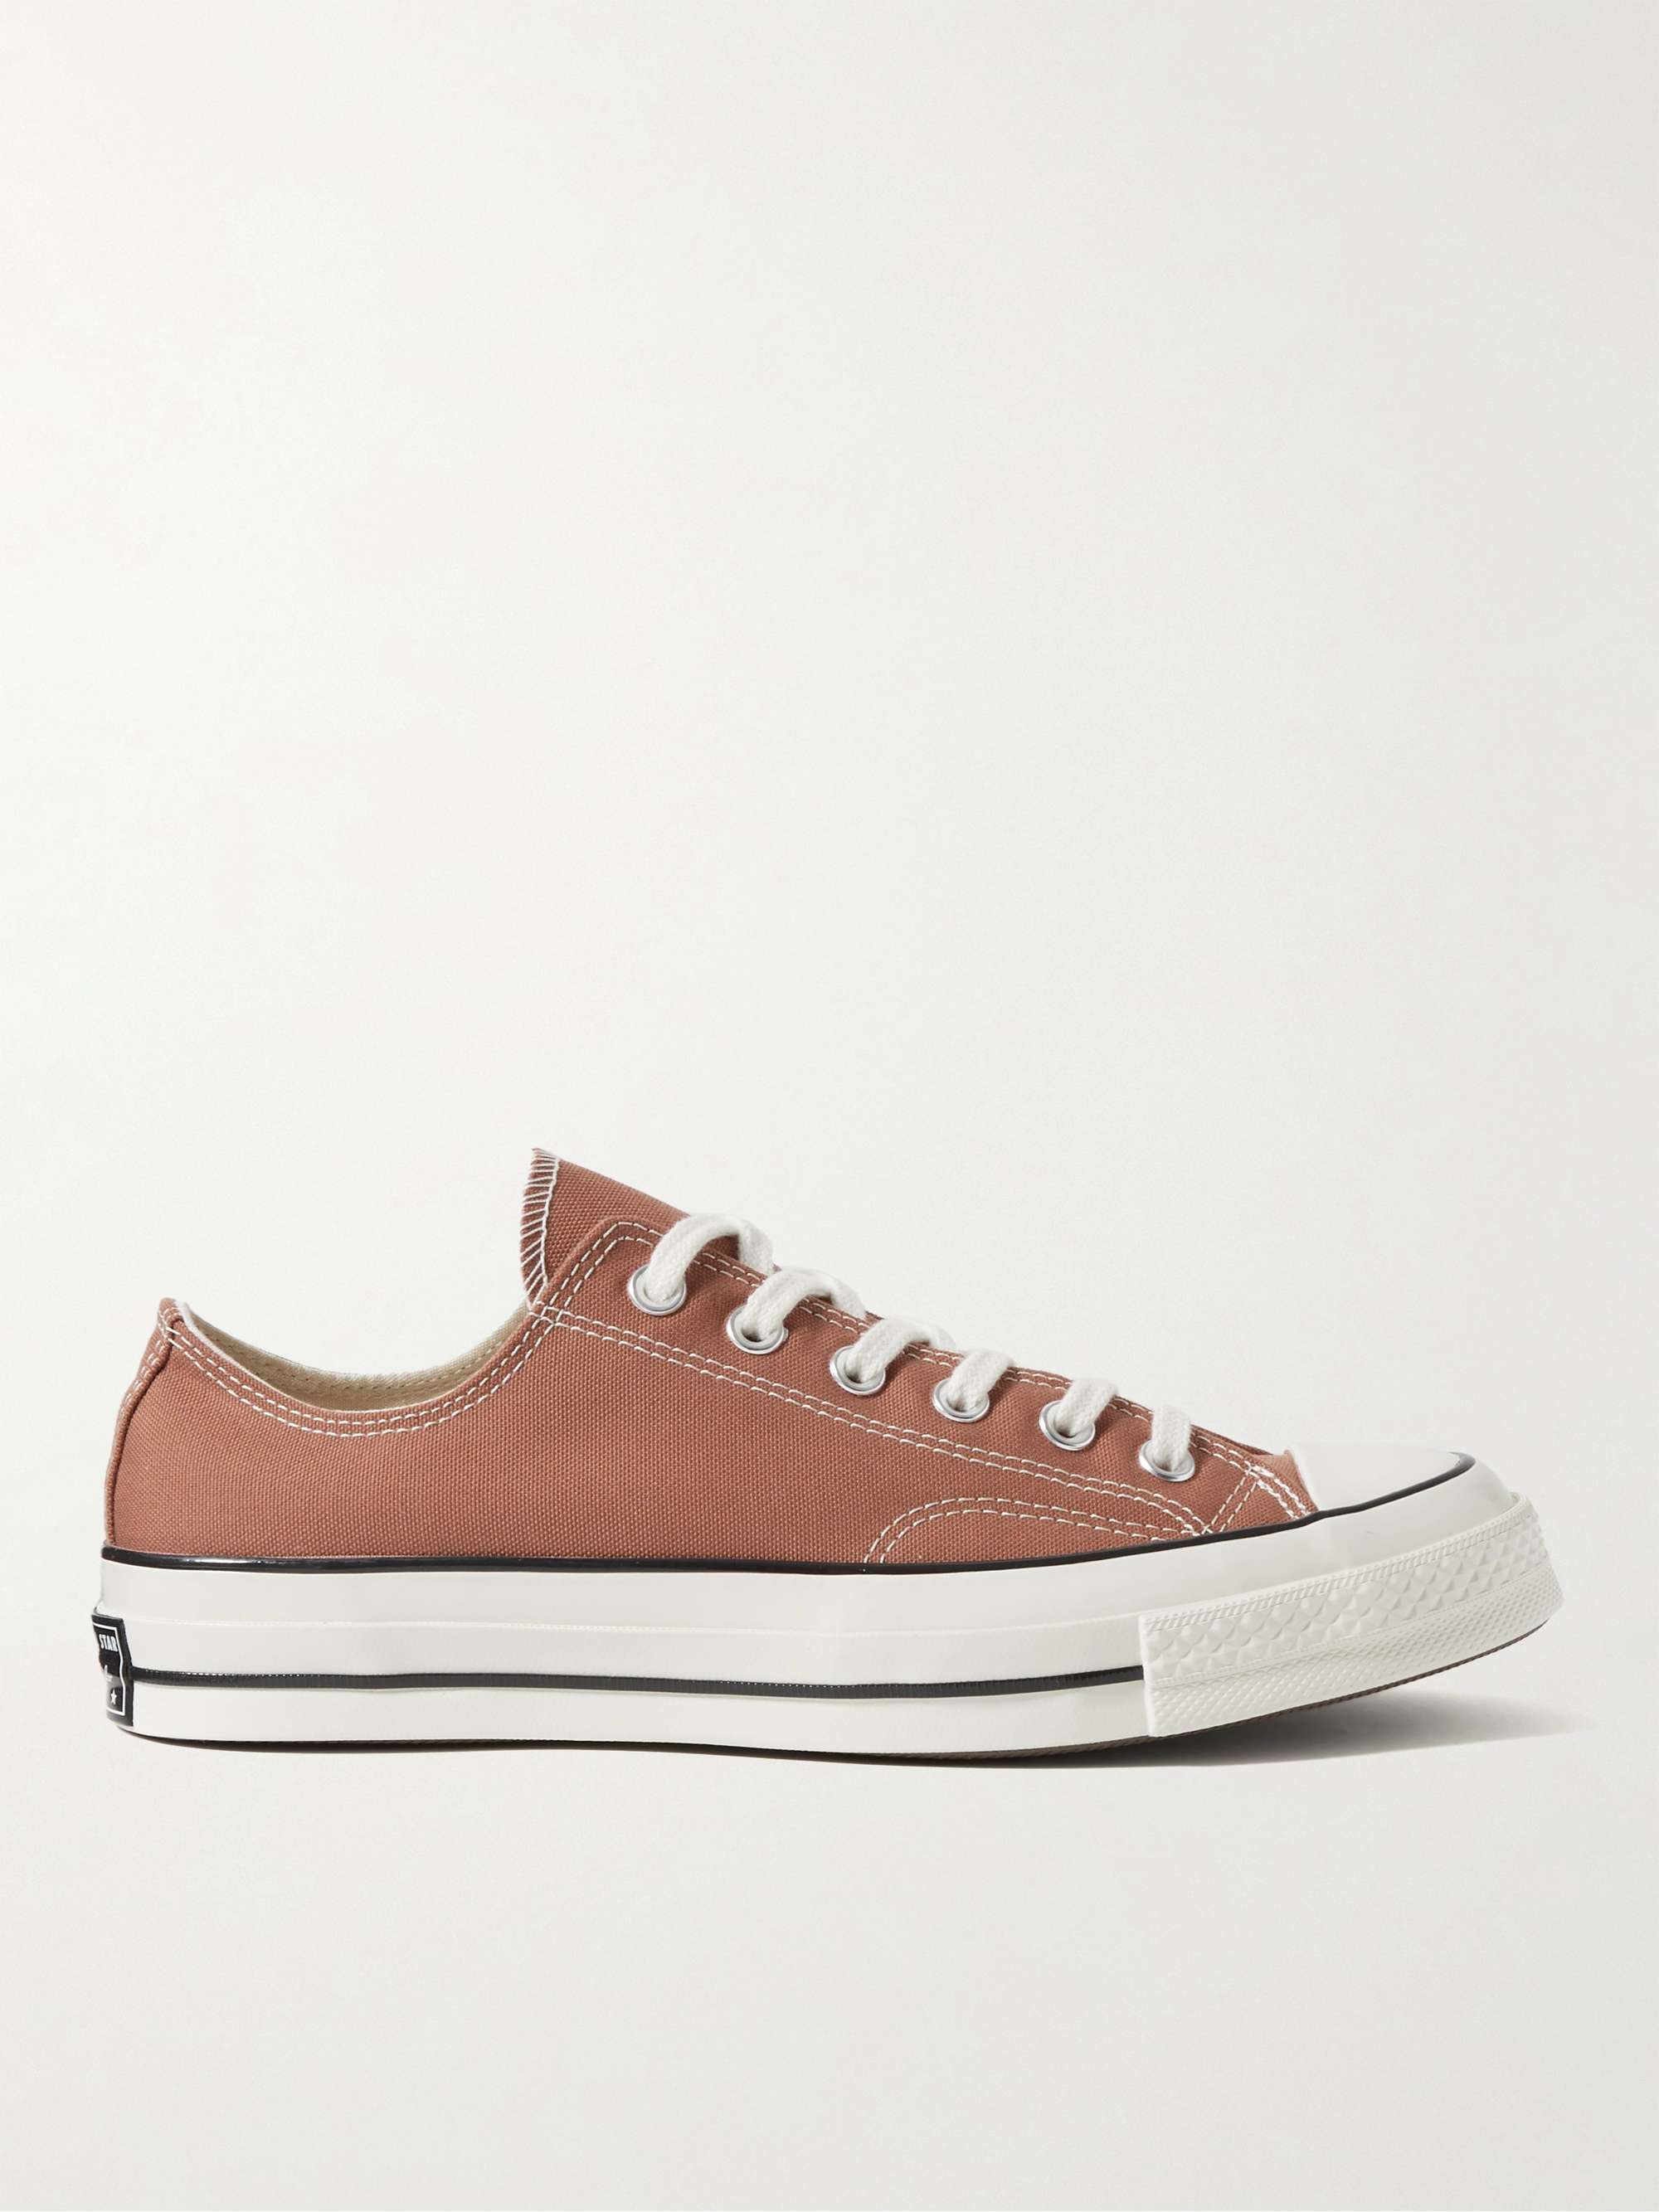 CONVERSE Chuck 70 Recycled Canvas Sneakers | MR PORTER